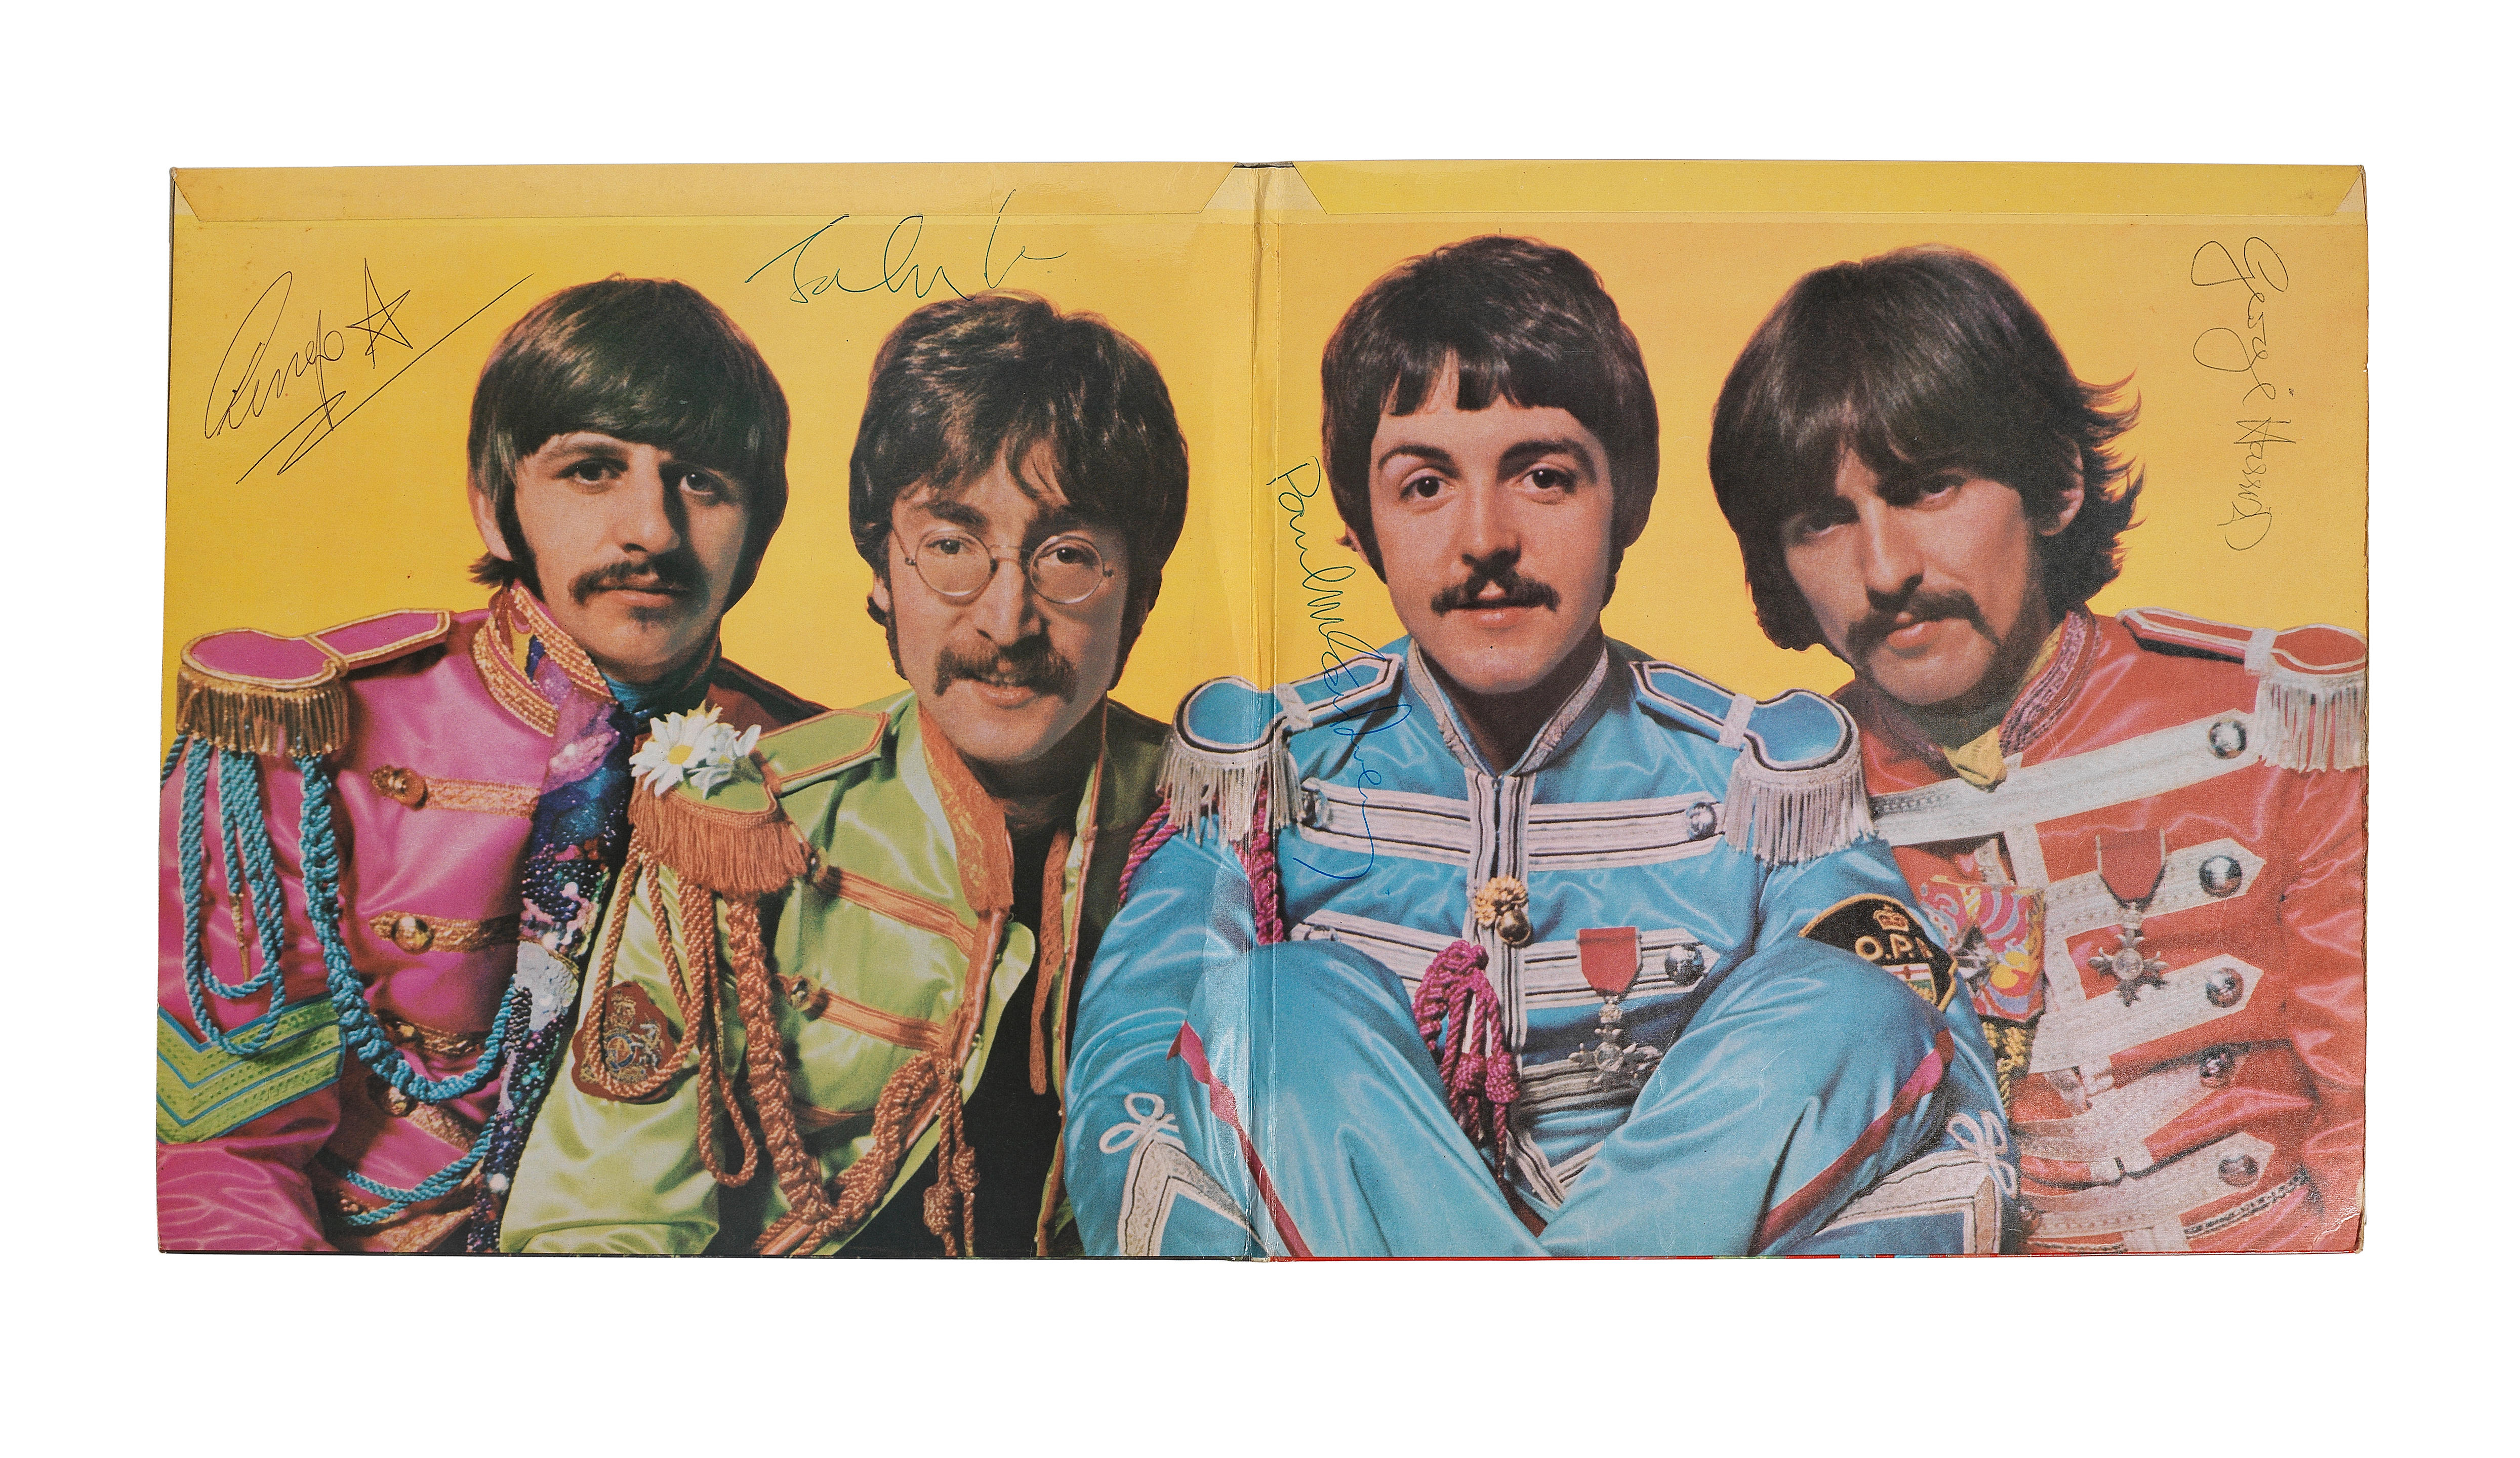 Bonhams : The Beatles a rare autographed 'Sgt. Pepper's Lonely Hearts Club  Band' album, signed on the gatefold sleeve by John Lennon, Paul McCartney  George Harrison and Ringo Starr later, 1967, Parlophone PMC 7027,